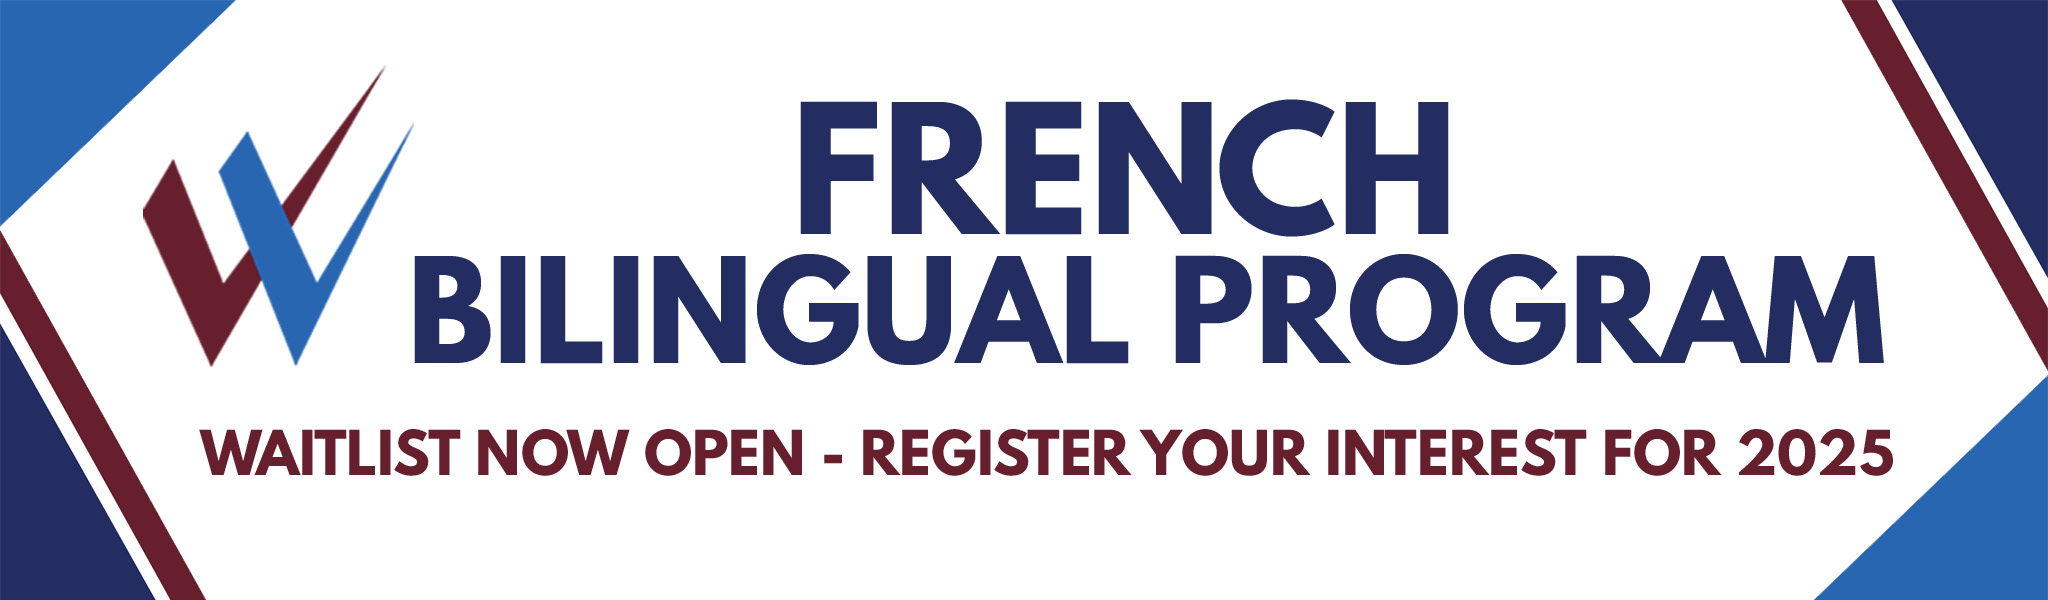 french-bilingual-excellence-program.jpg